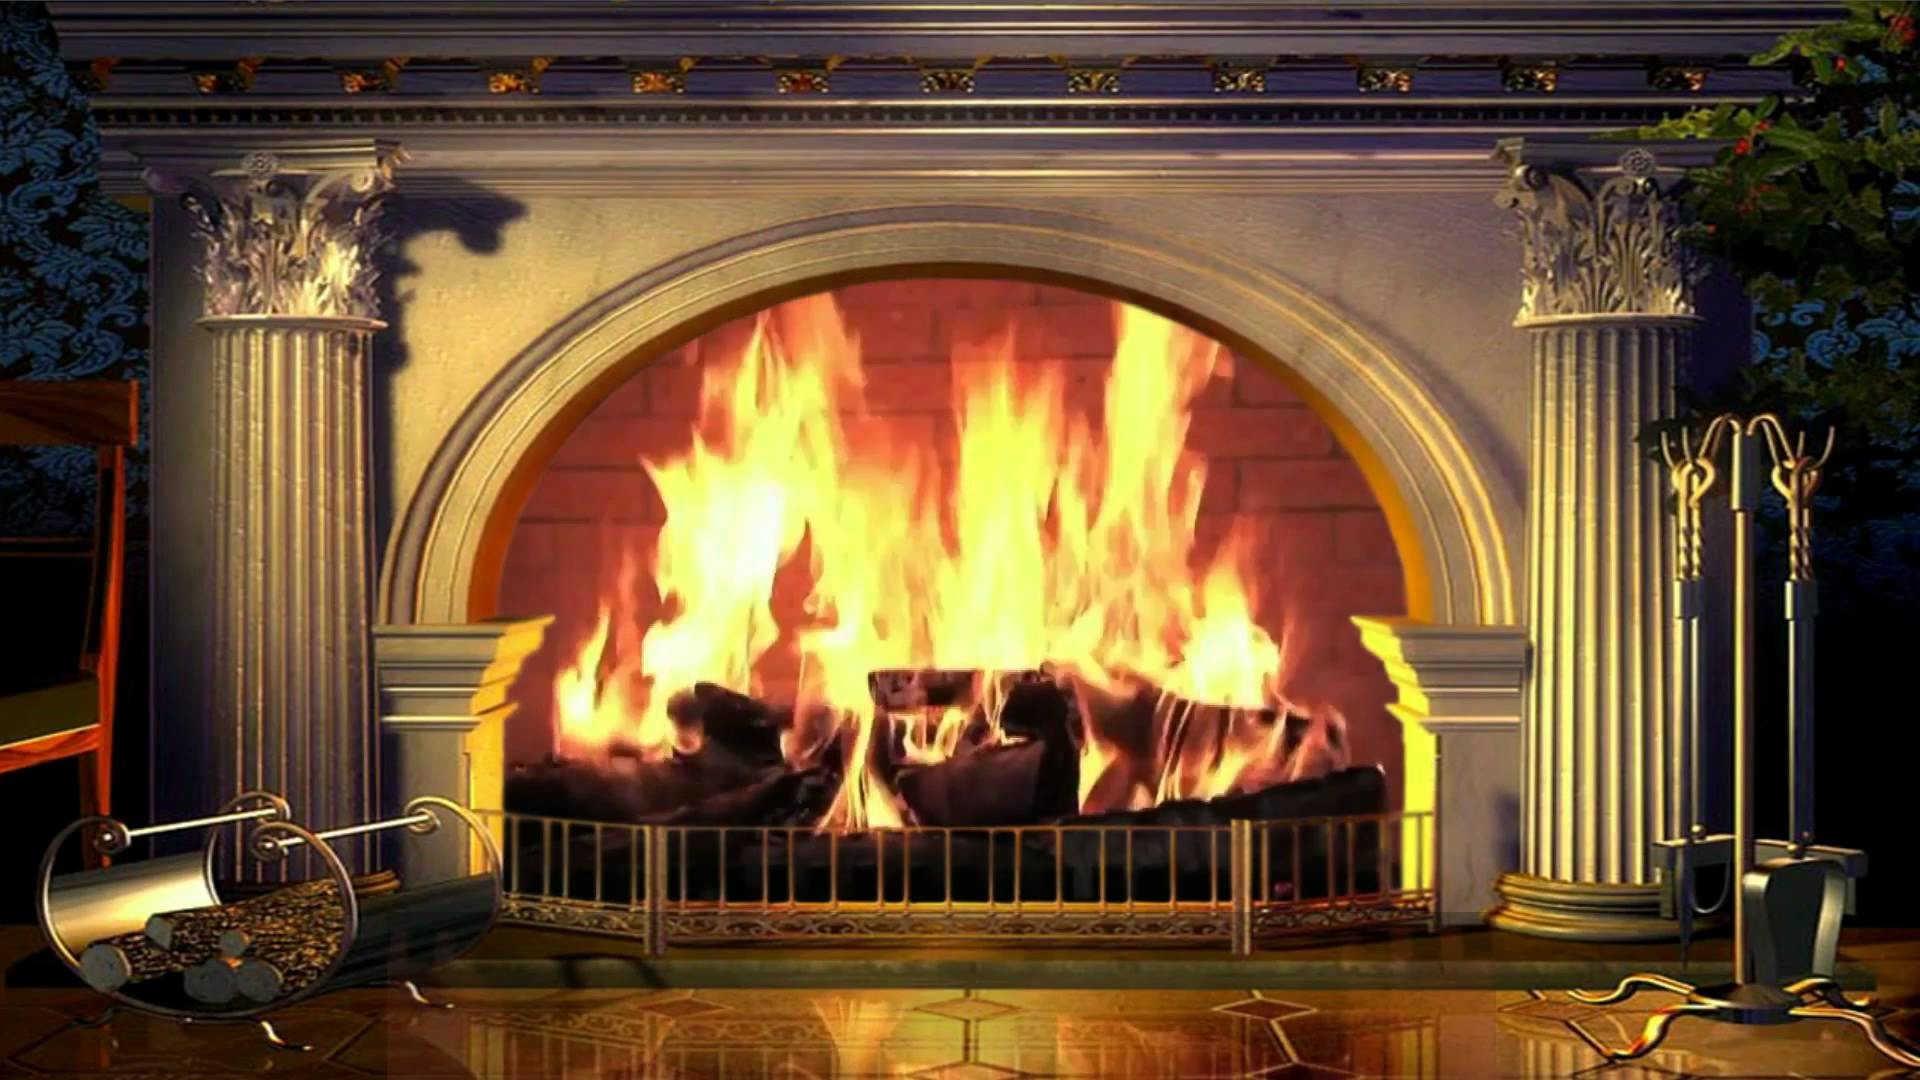 1920x1080 Virtual Fireplace Yule Log - Free background video 1080p HD stock video  footage - YouTube